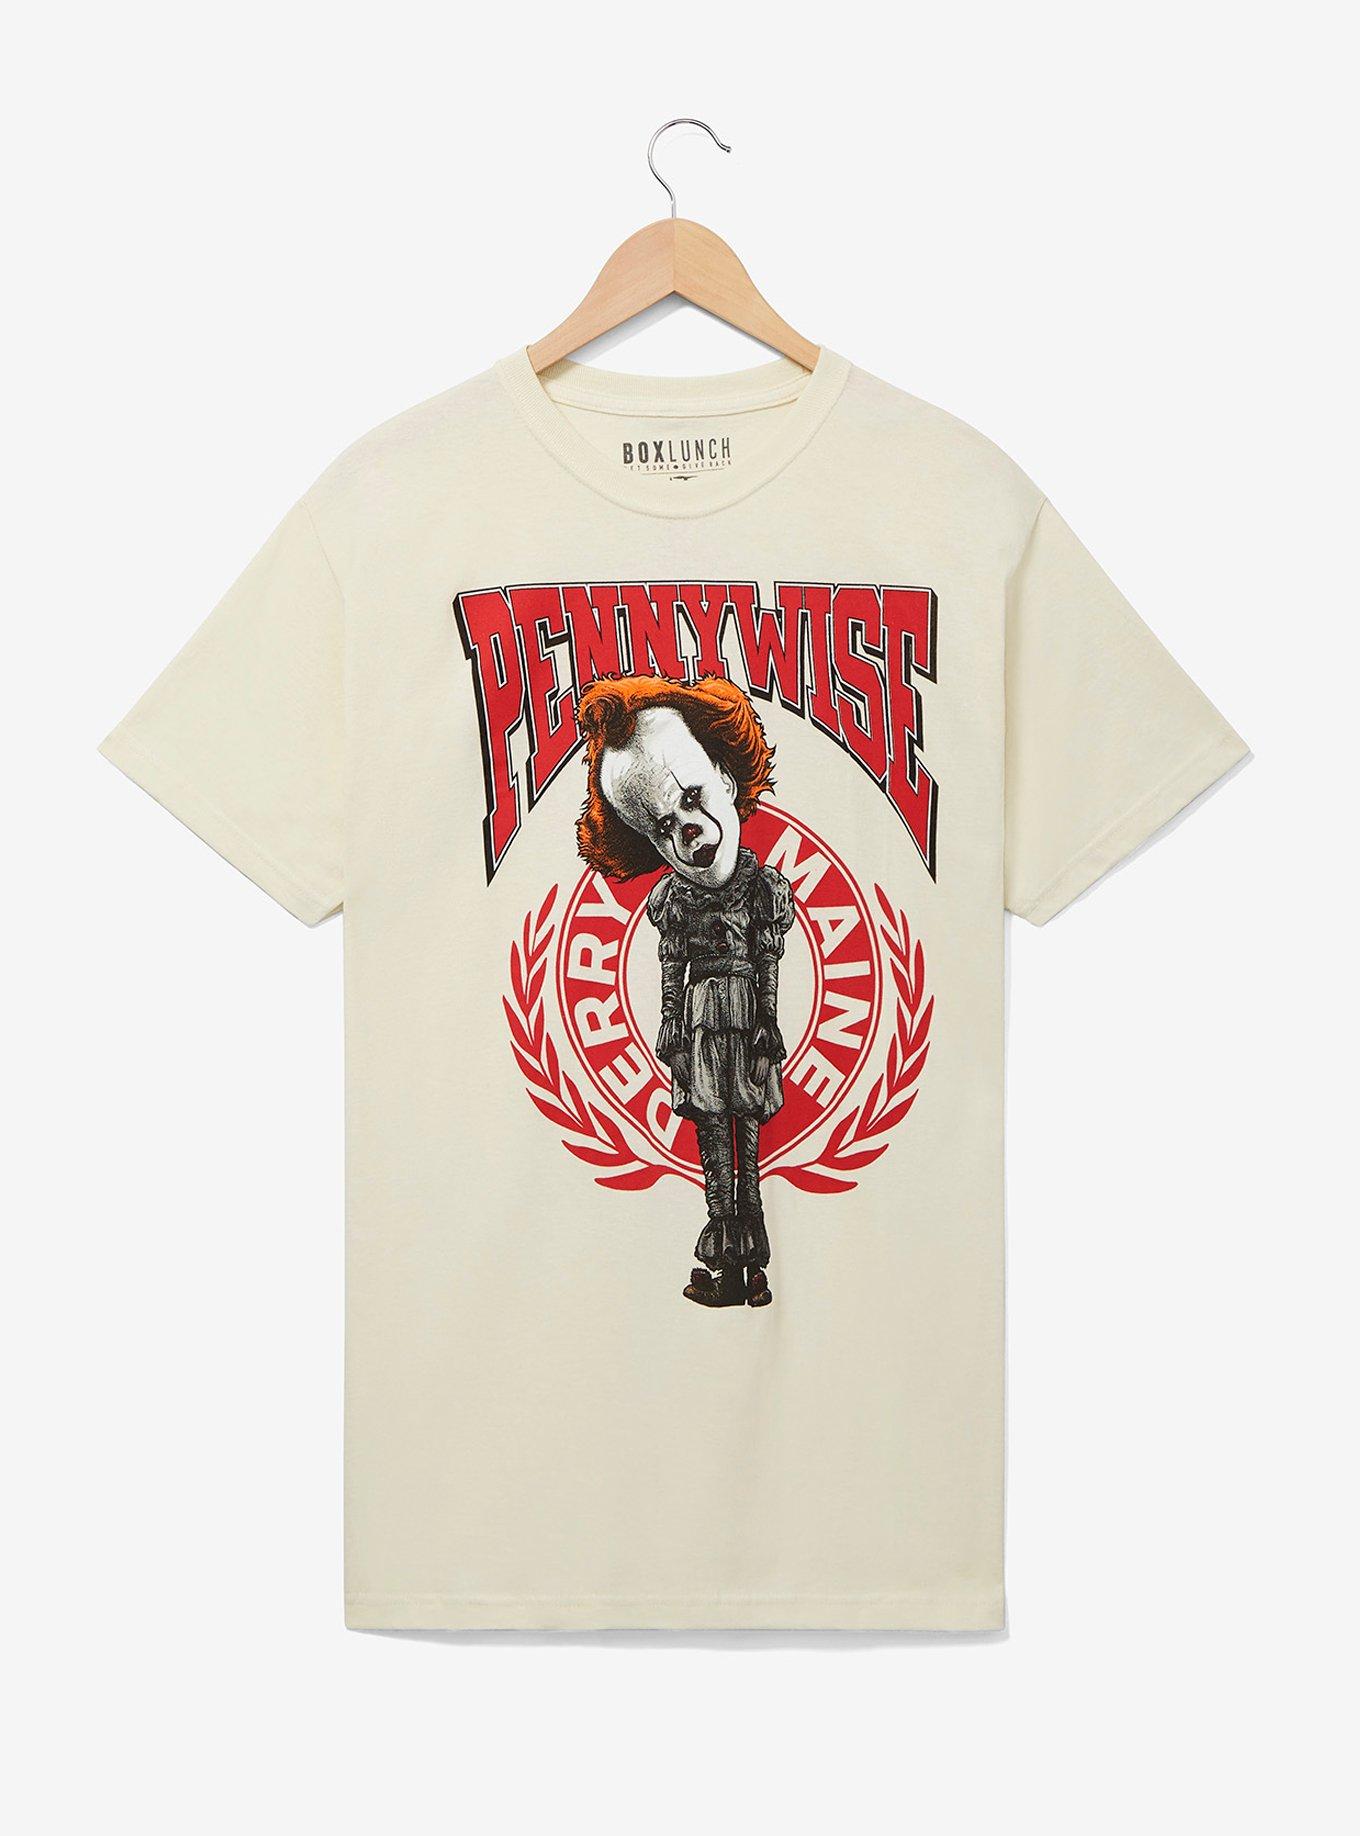 It Pennywise the Clown Portrait T-Shirt - BoxLunch Exclusive, TANBEIGE, hi-res